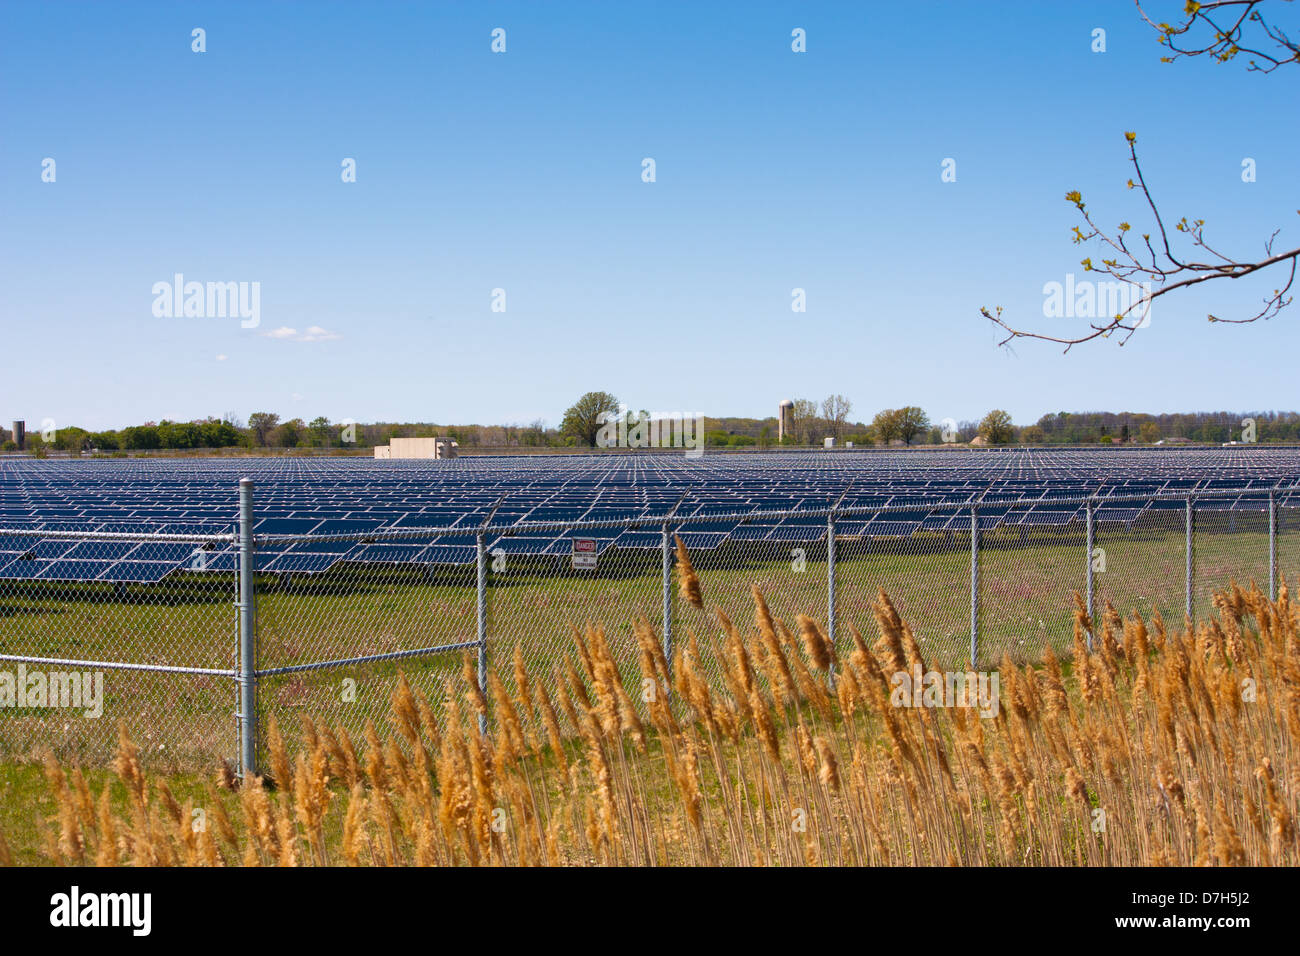 In Sarnia Ontario acres of farmland are covered with solar panels to produce energy from the sun at this large scale solar farm. Stock Photo